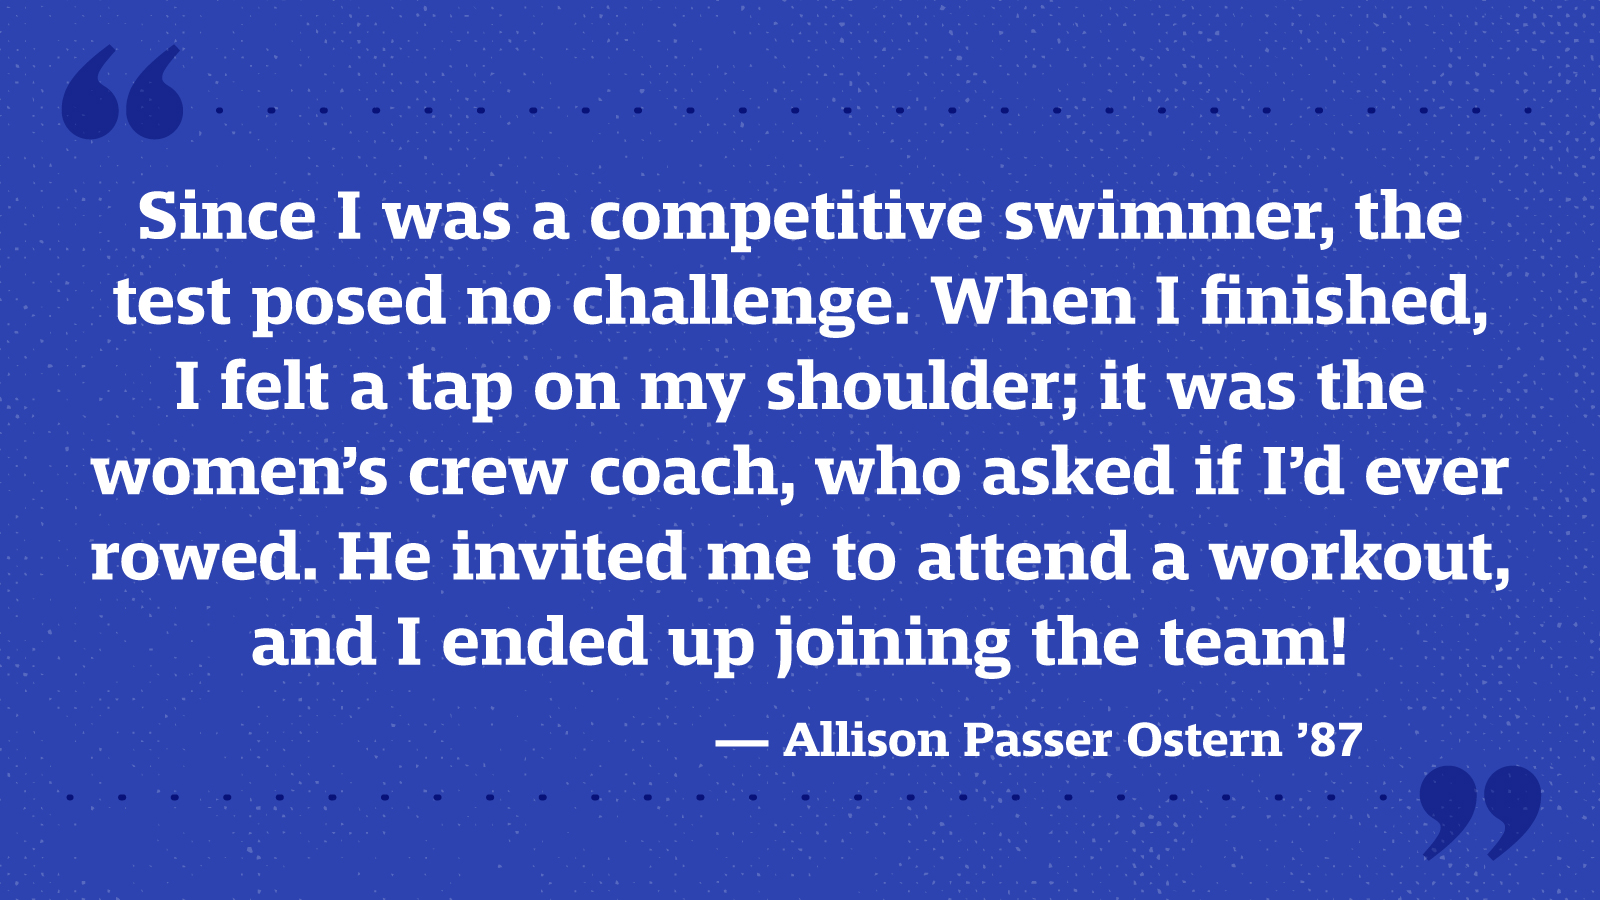 Since I was a competitive swimmer, the test posed no challenge. When I finished, I felt a tap on my shoulder; it was the women’s crew coach, who asked if I’d ever rowed. He invited me to attend a workout, and I ended up joining the team! — Allison Passer Ostern ’87